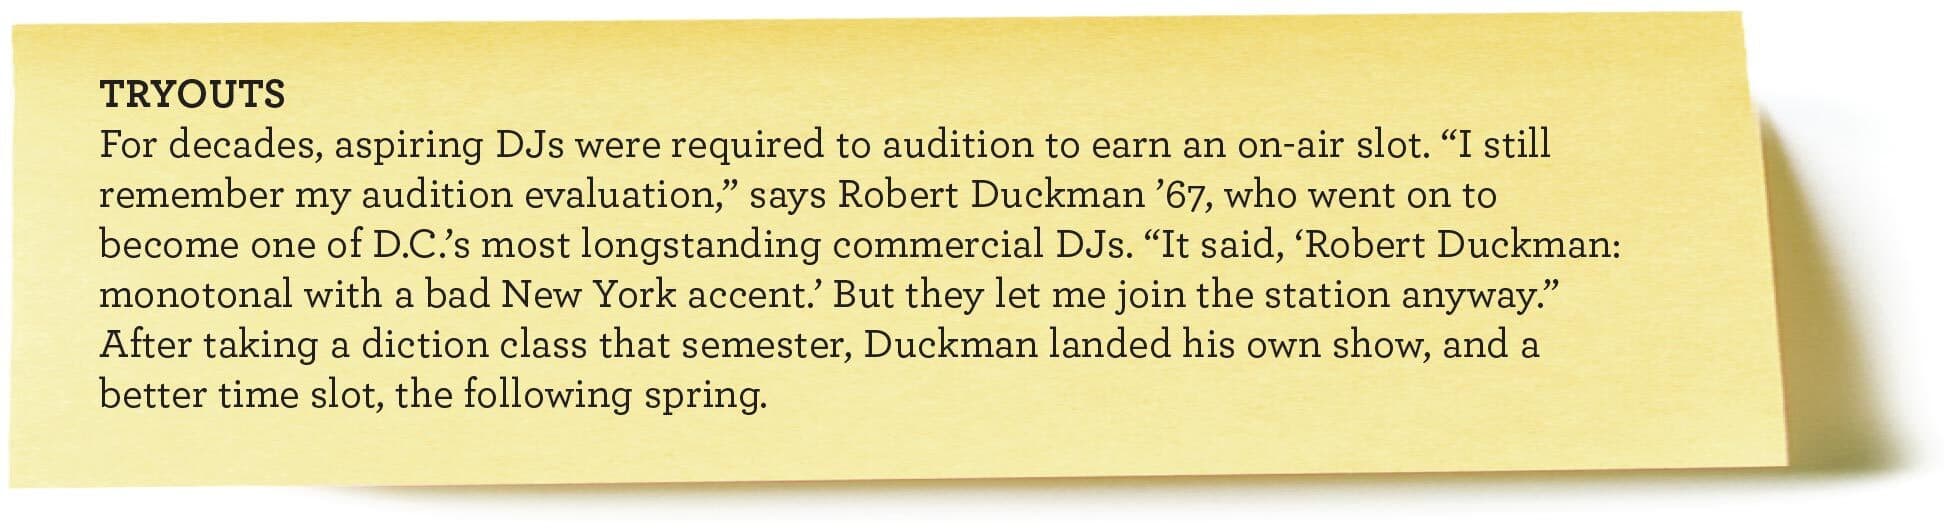 TRYOUTS
For decades, aspiring DJs were required to audition to earn an on-air slot. “I still remember my audition evaluation,” says Robert Duckman ’67, who went on to become one of D.C.’s most longstanding commercial DJs. “It said, ‘Robert Duckman: monotonal with a bad New York accent.’ But they let me join the station anyway.” After taking a diction class that semester, Duckman landed his own show,
and a better time slot, the following spring.